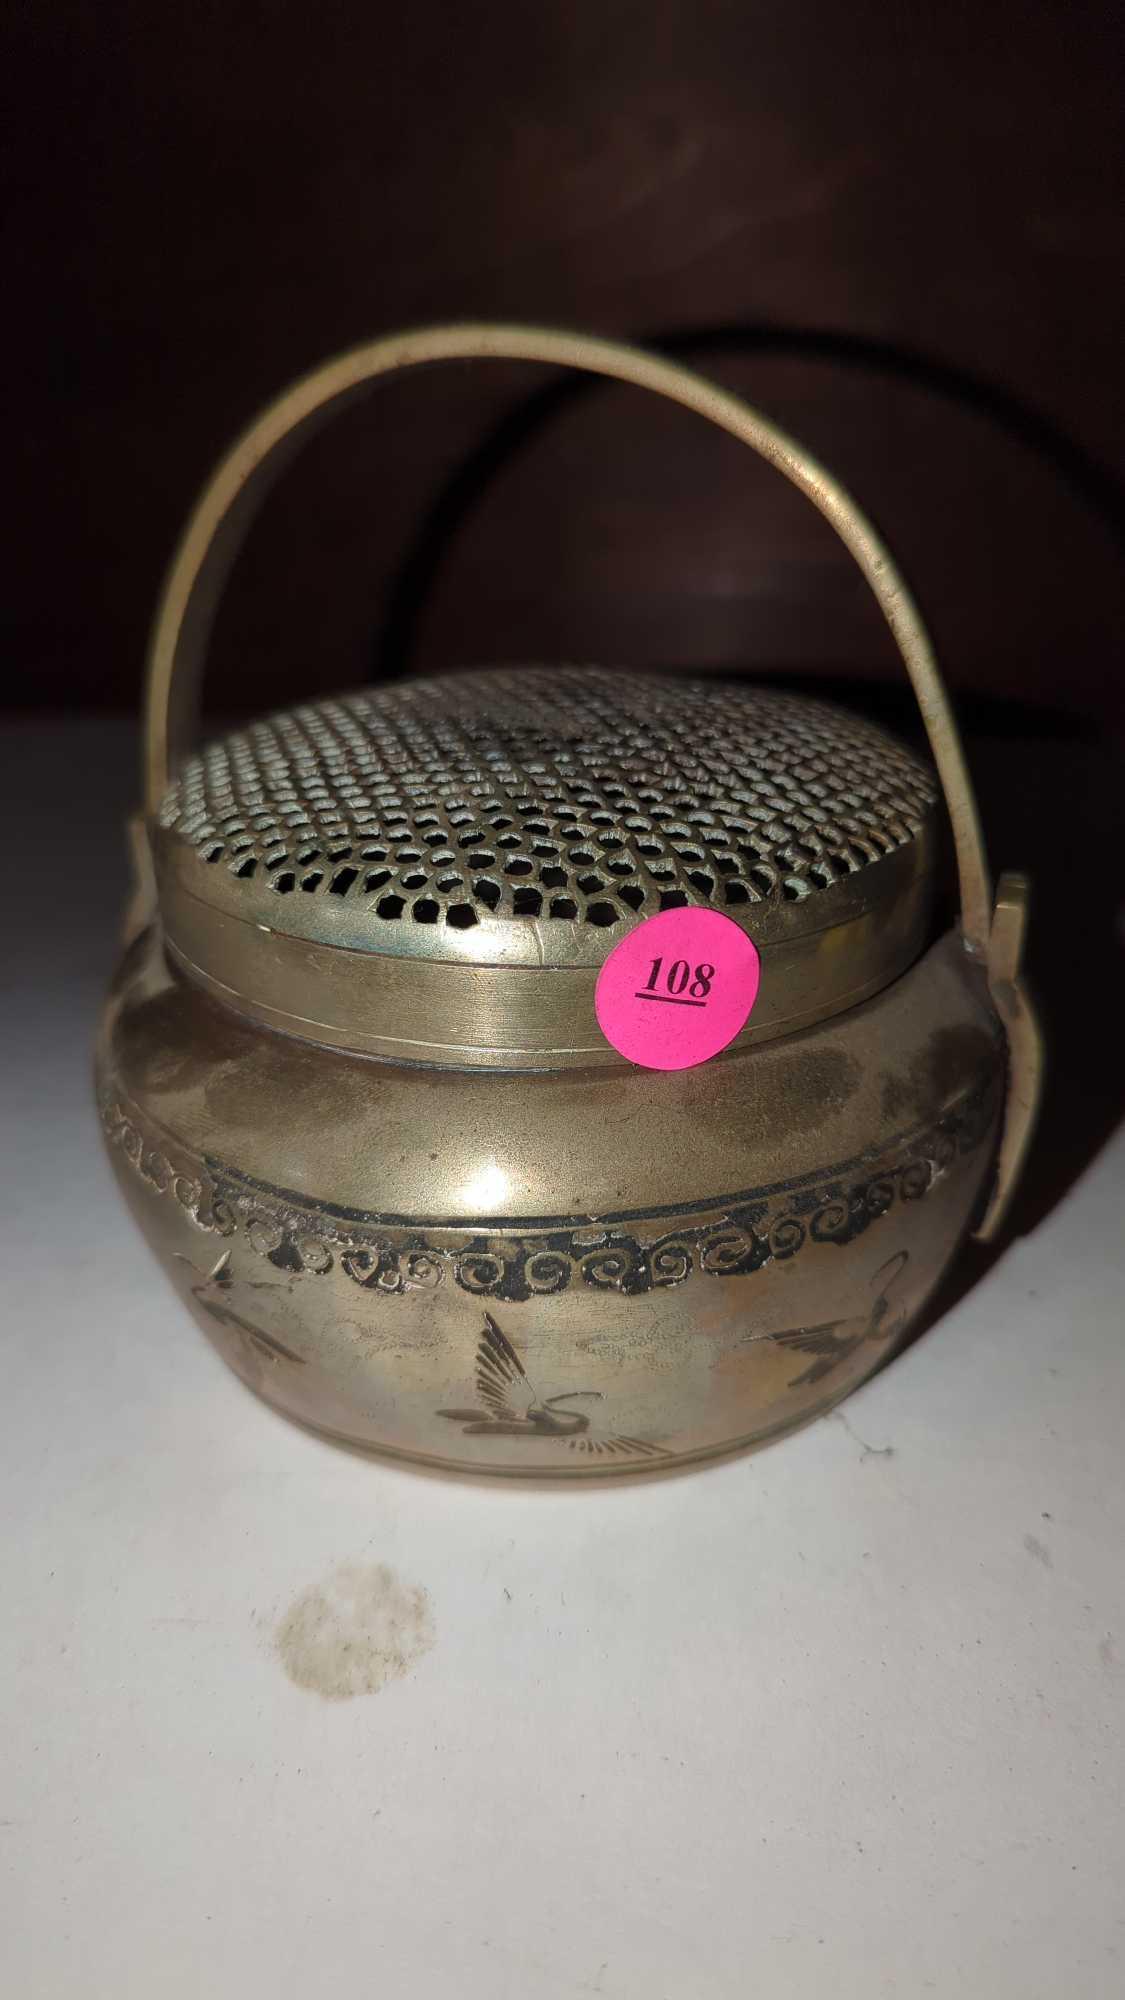 (FOY) ANTIQUE CHINESE BRASS HAND WARMER, DEPICTS FLYING CRANES ON THE BASE, NO OTHER IDENTIFYING